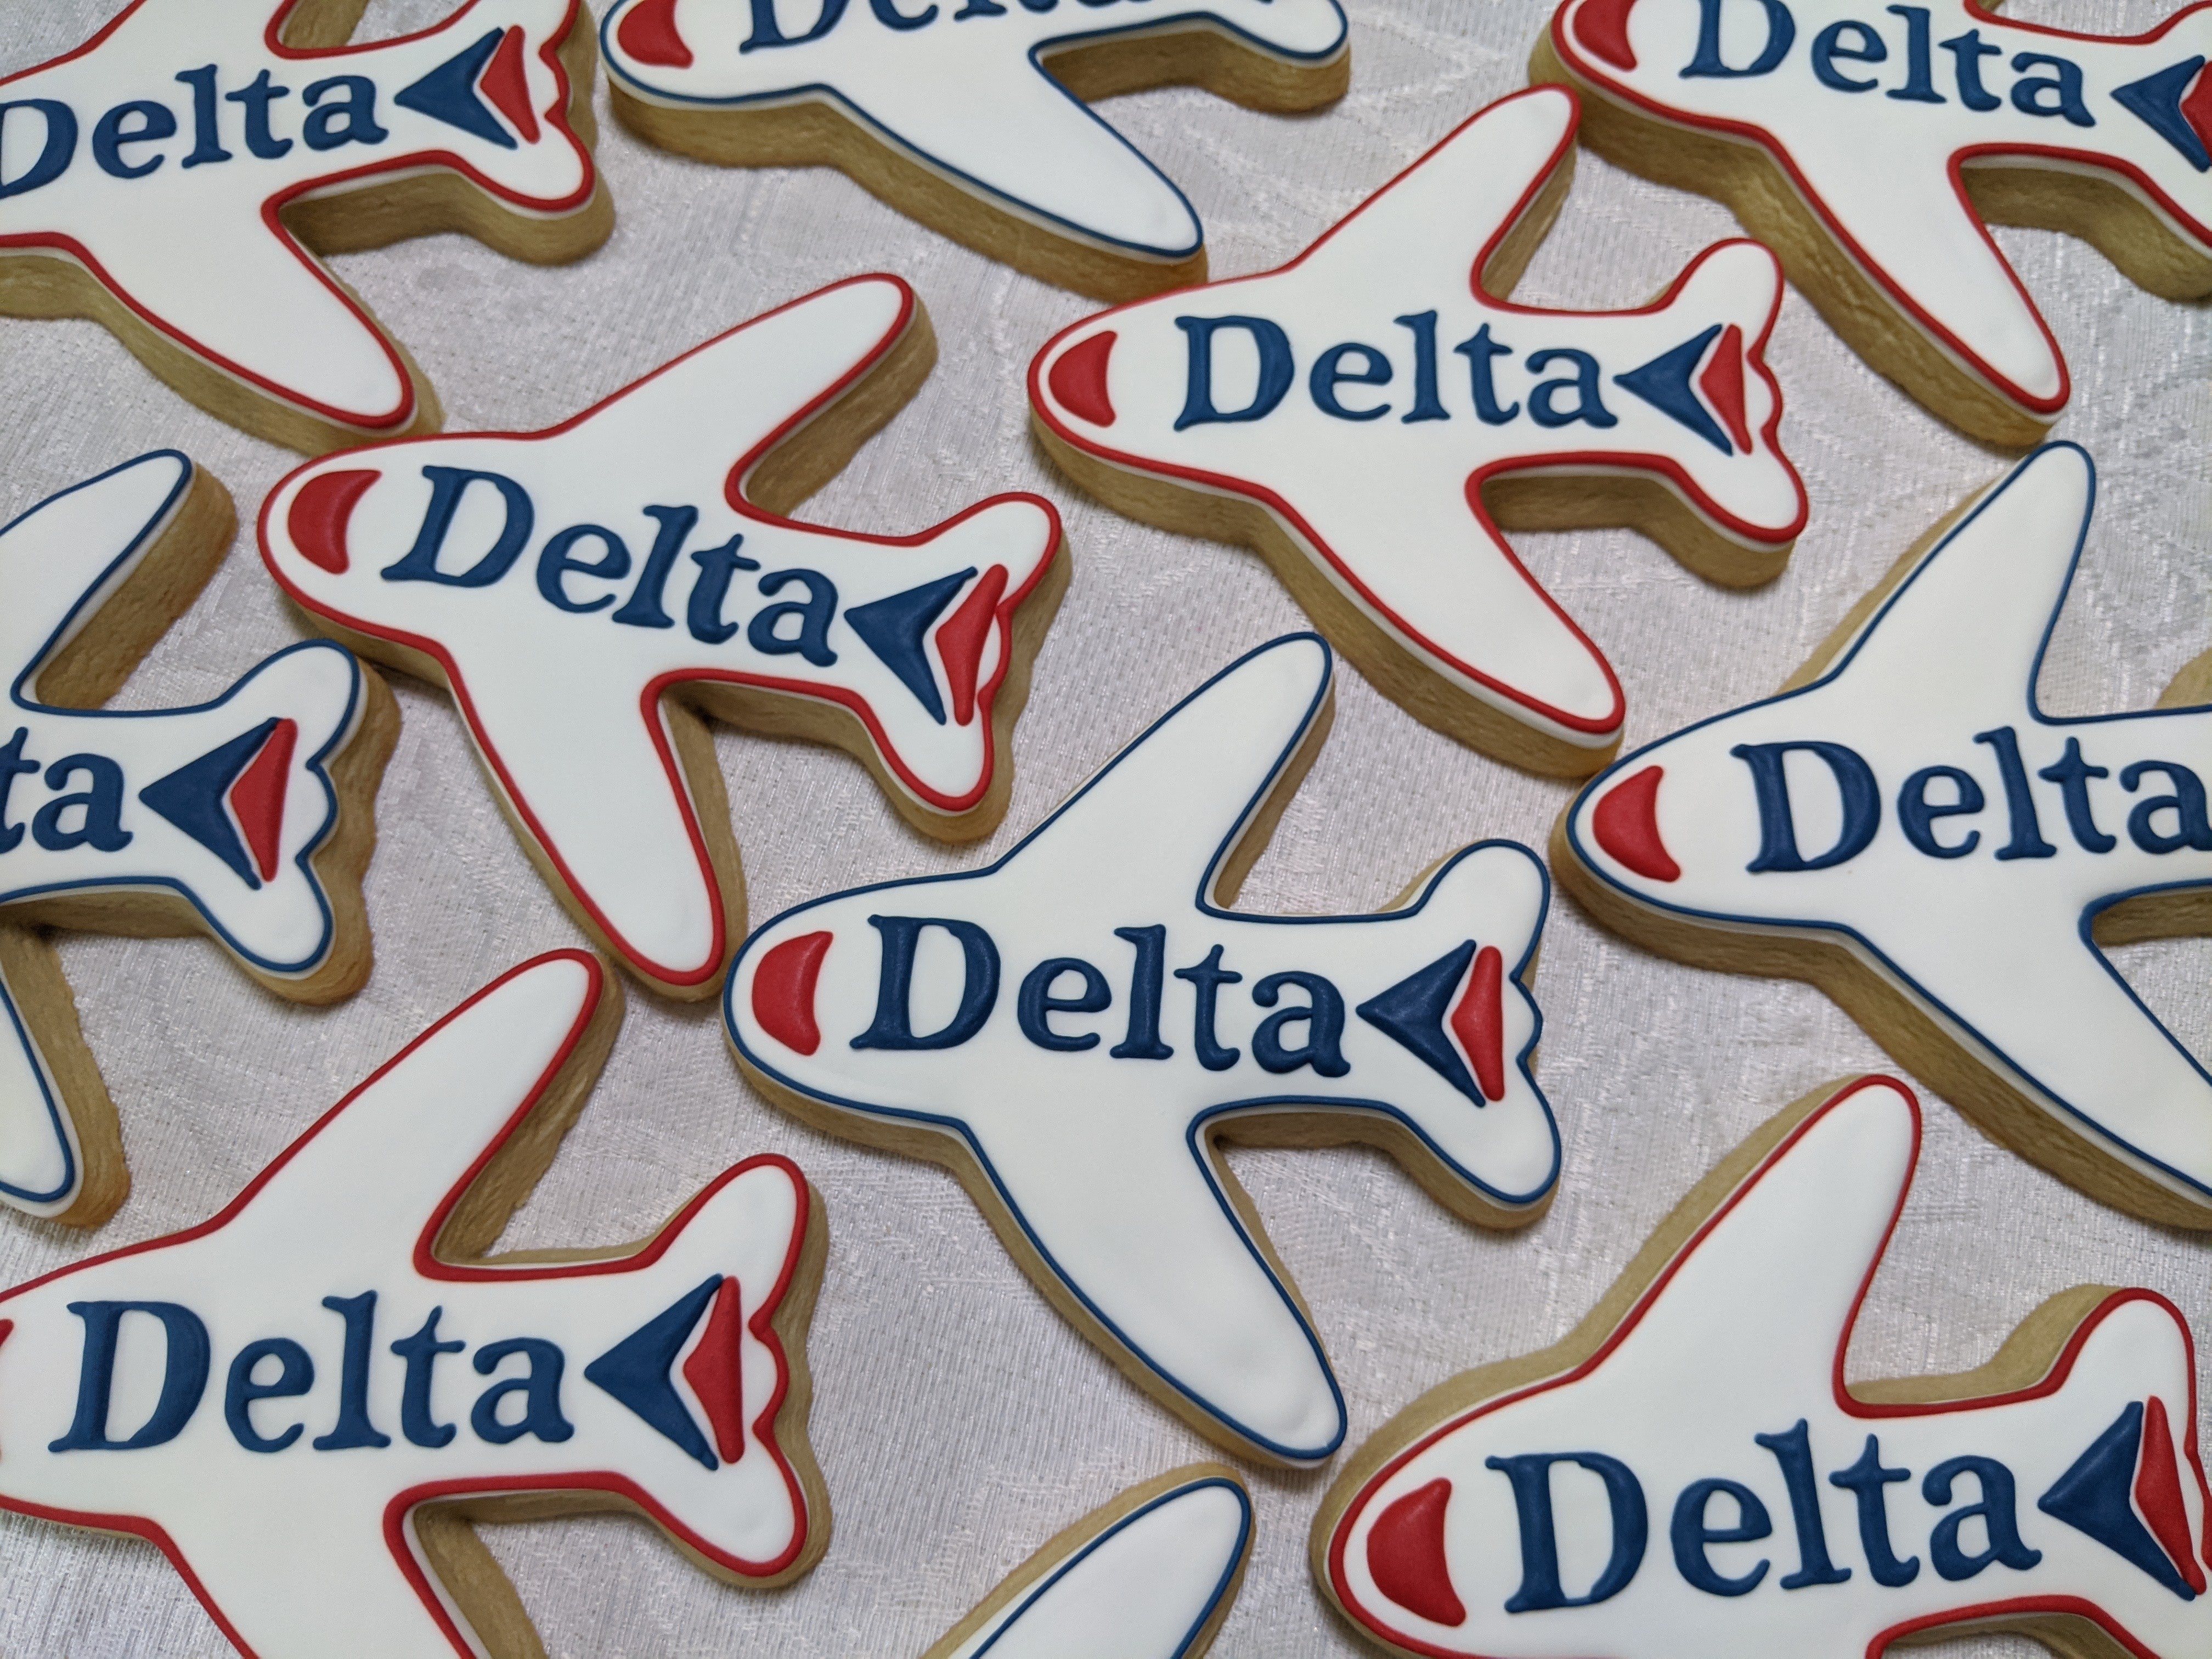 Company Airline Logo 24 cookies